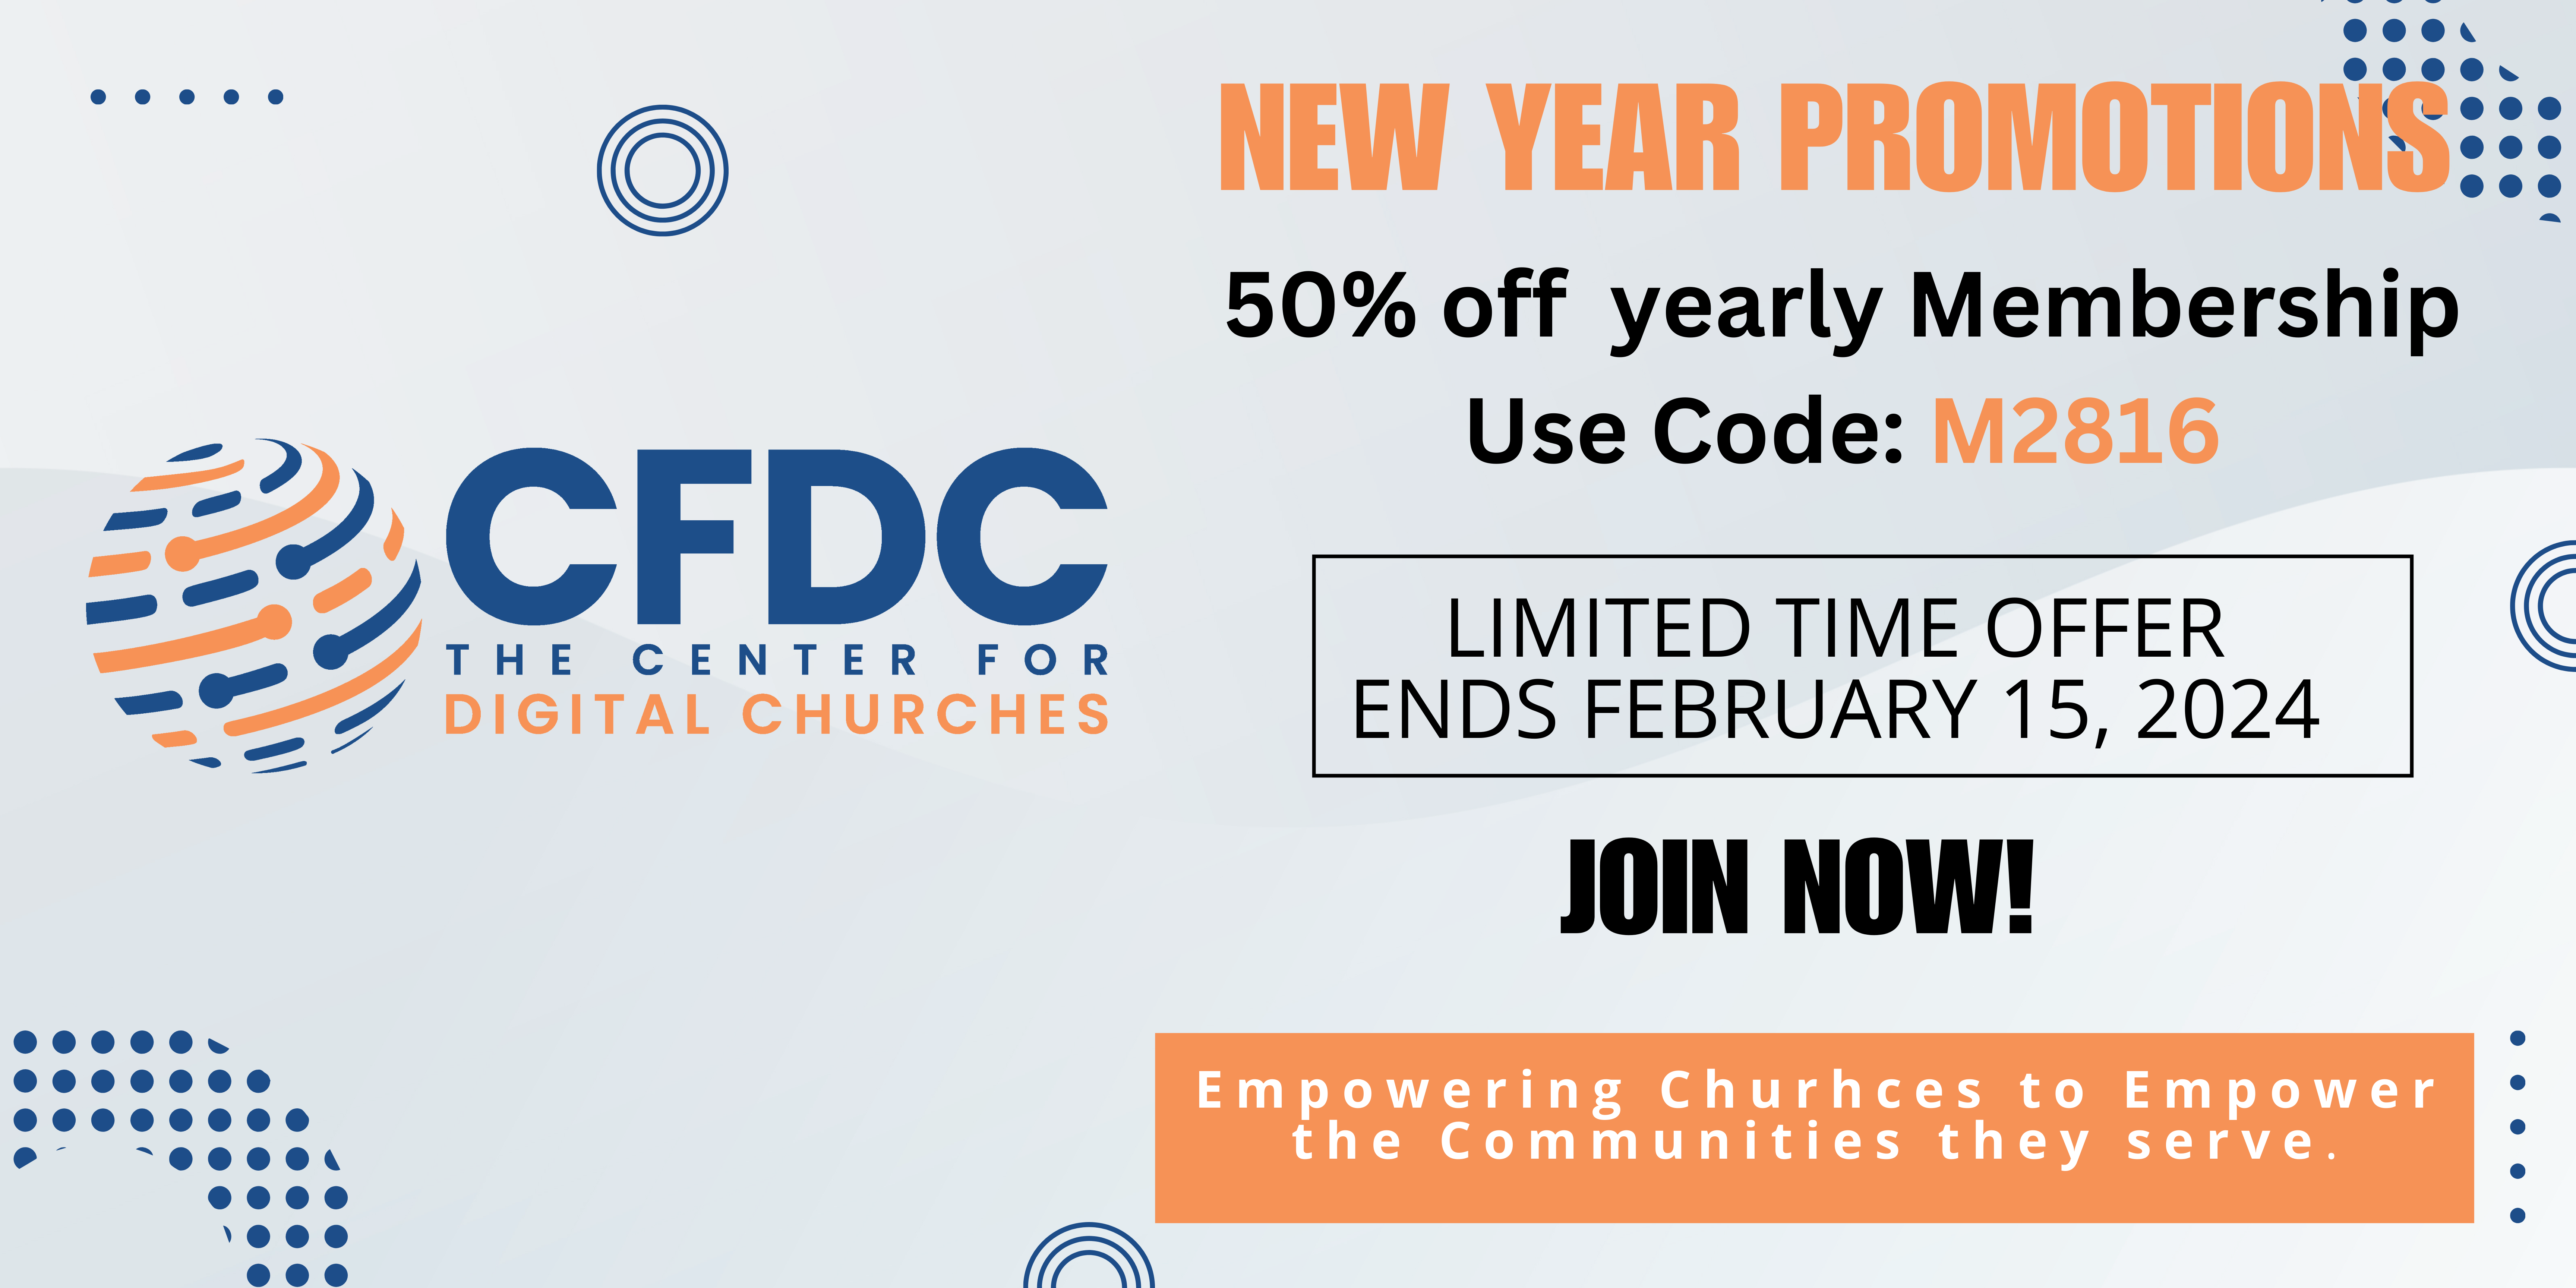 Join CFDC Now!